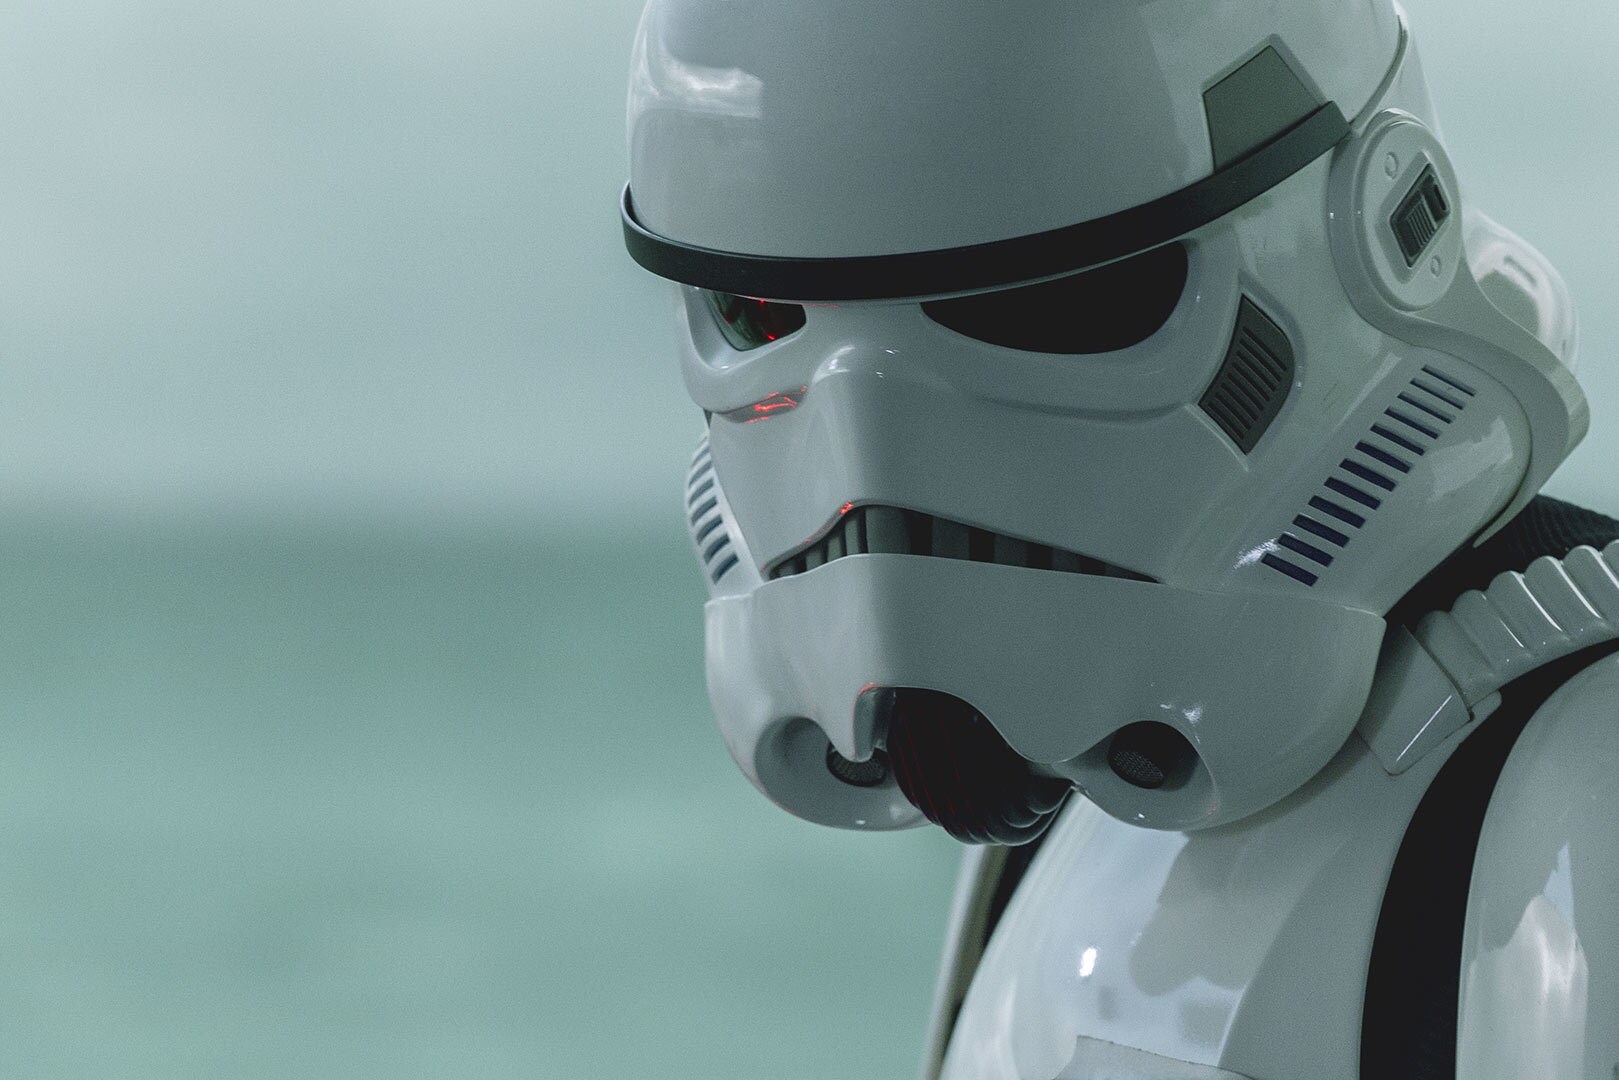 daryl hooker share picture of stormtrooper photos